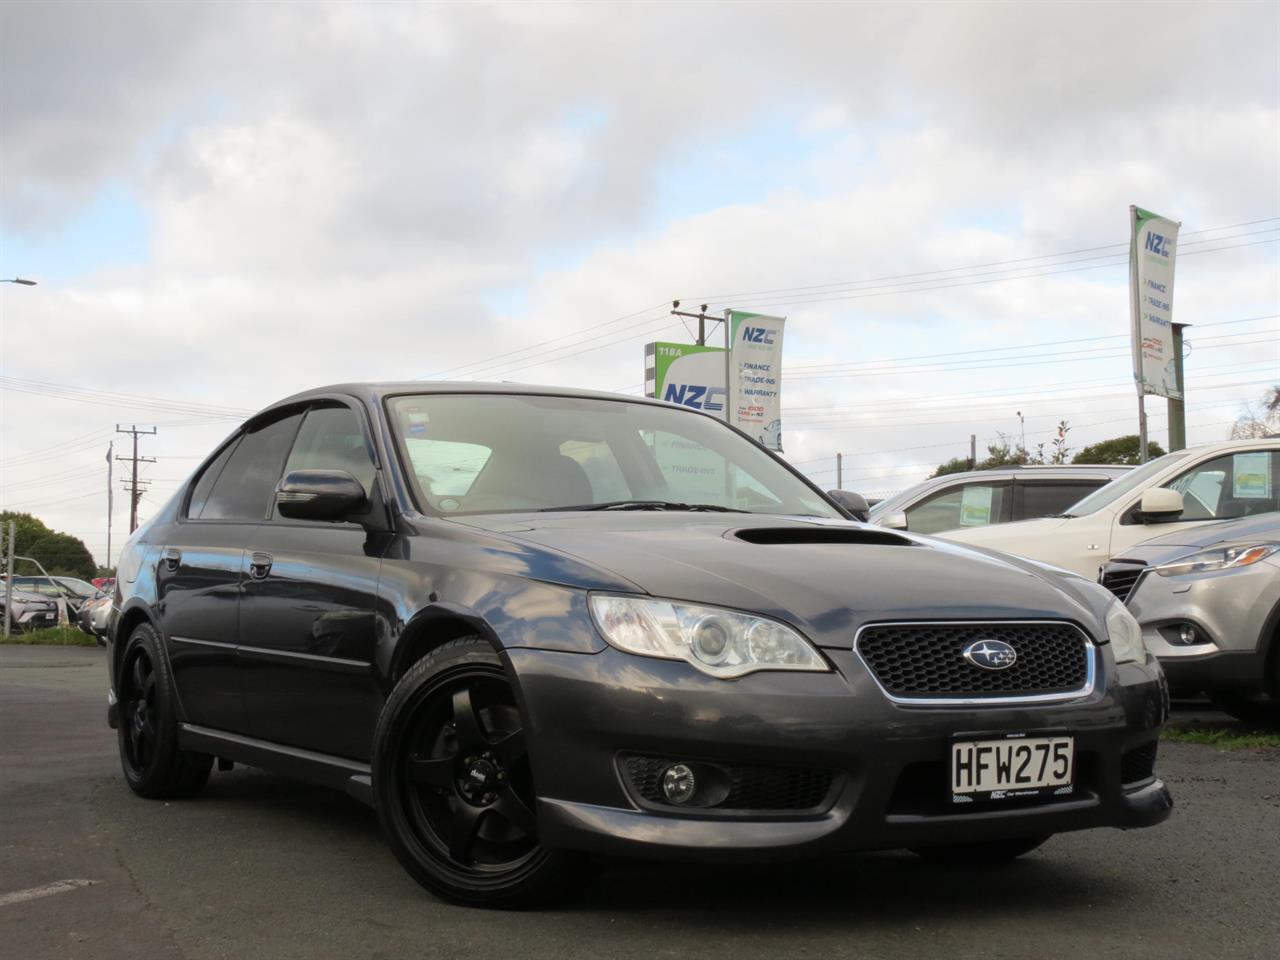 NZC 2007 Subaru Legacy just arrived to Auckland